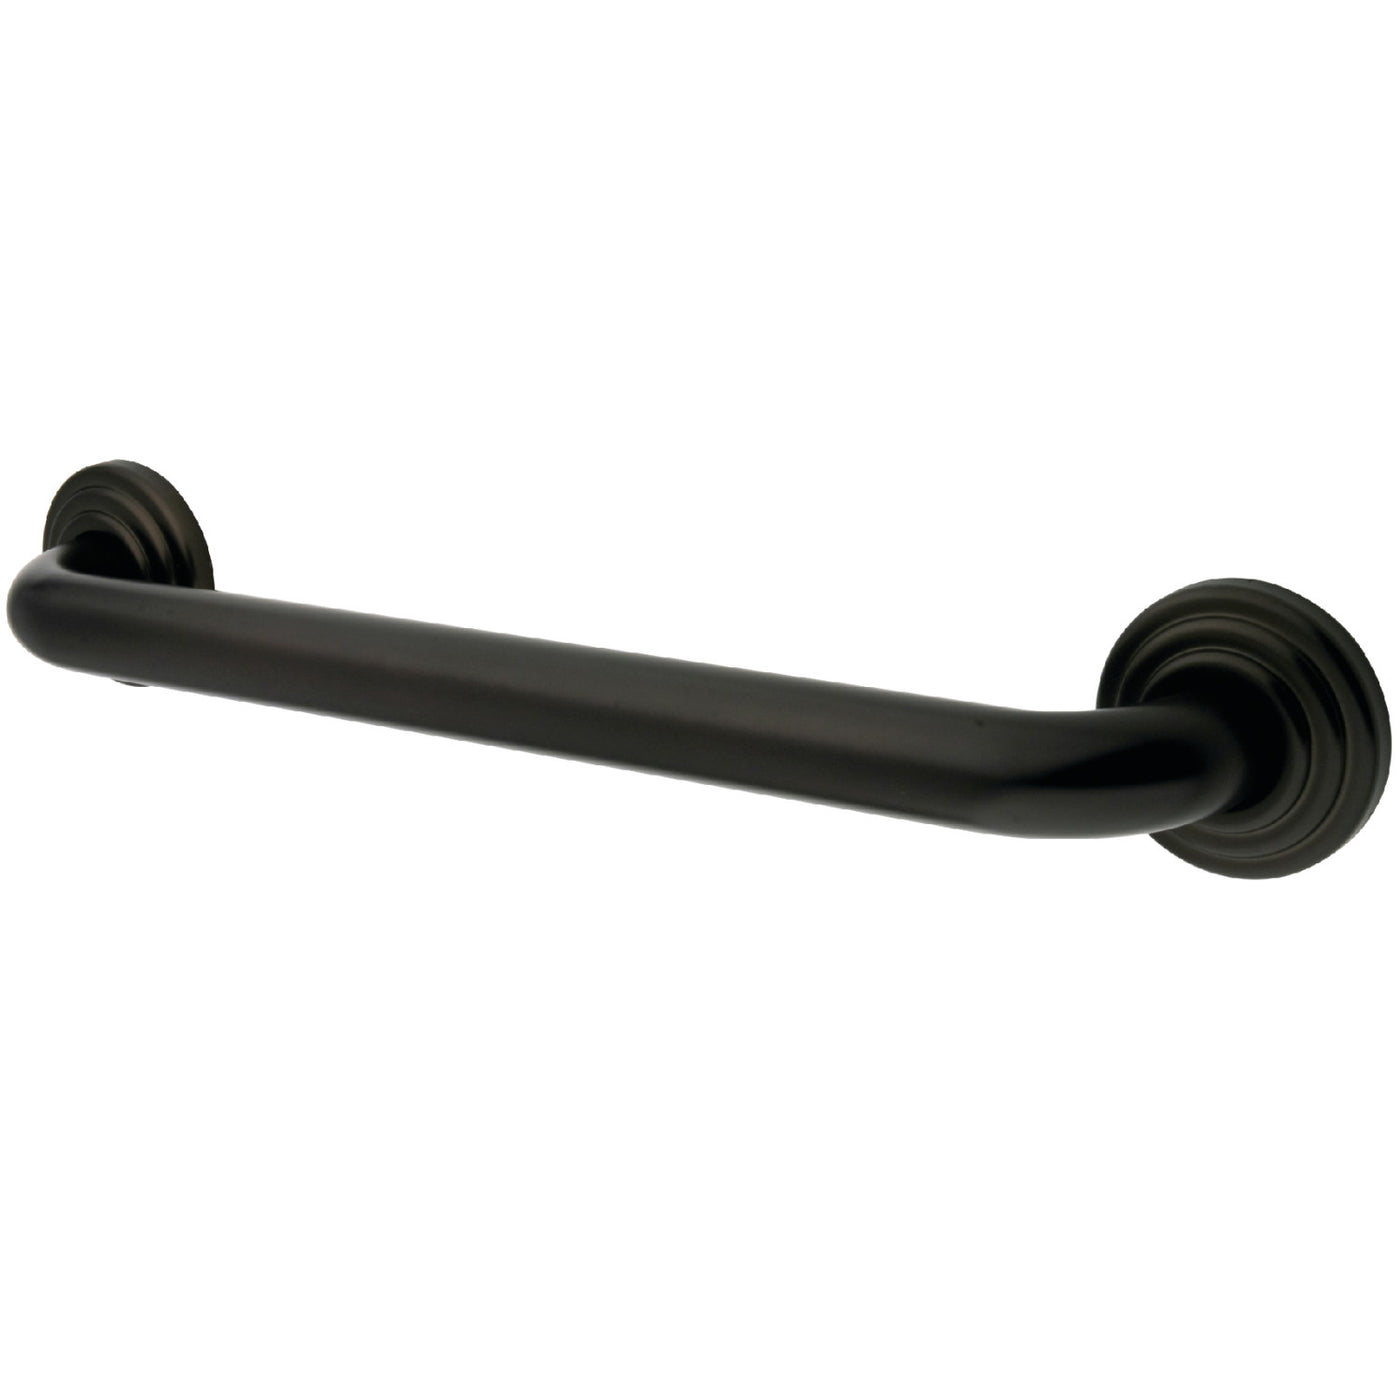 Elements of Design EDR314365 36-Inch X 1-1/4-Inch OD Grab Bar, Oil Rubbed Bronze